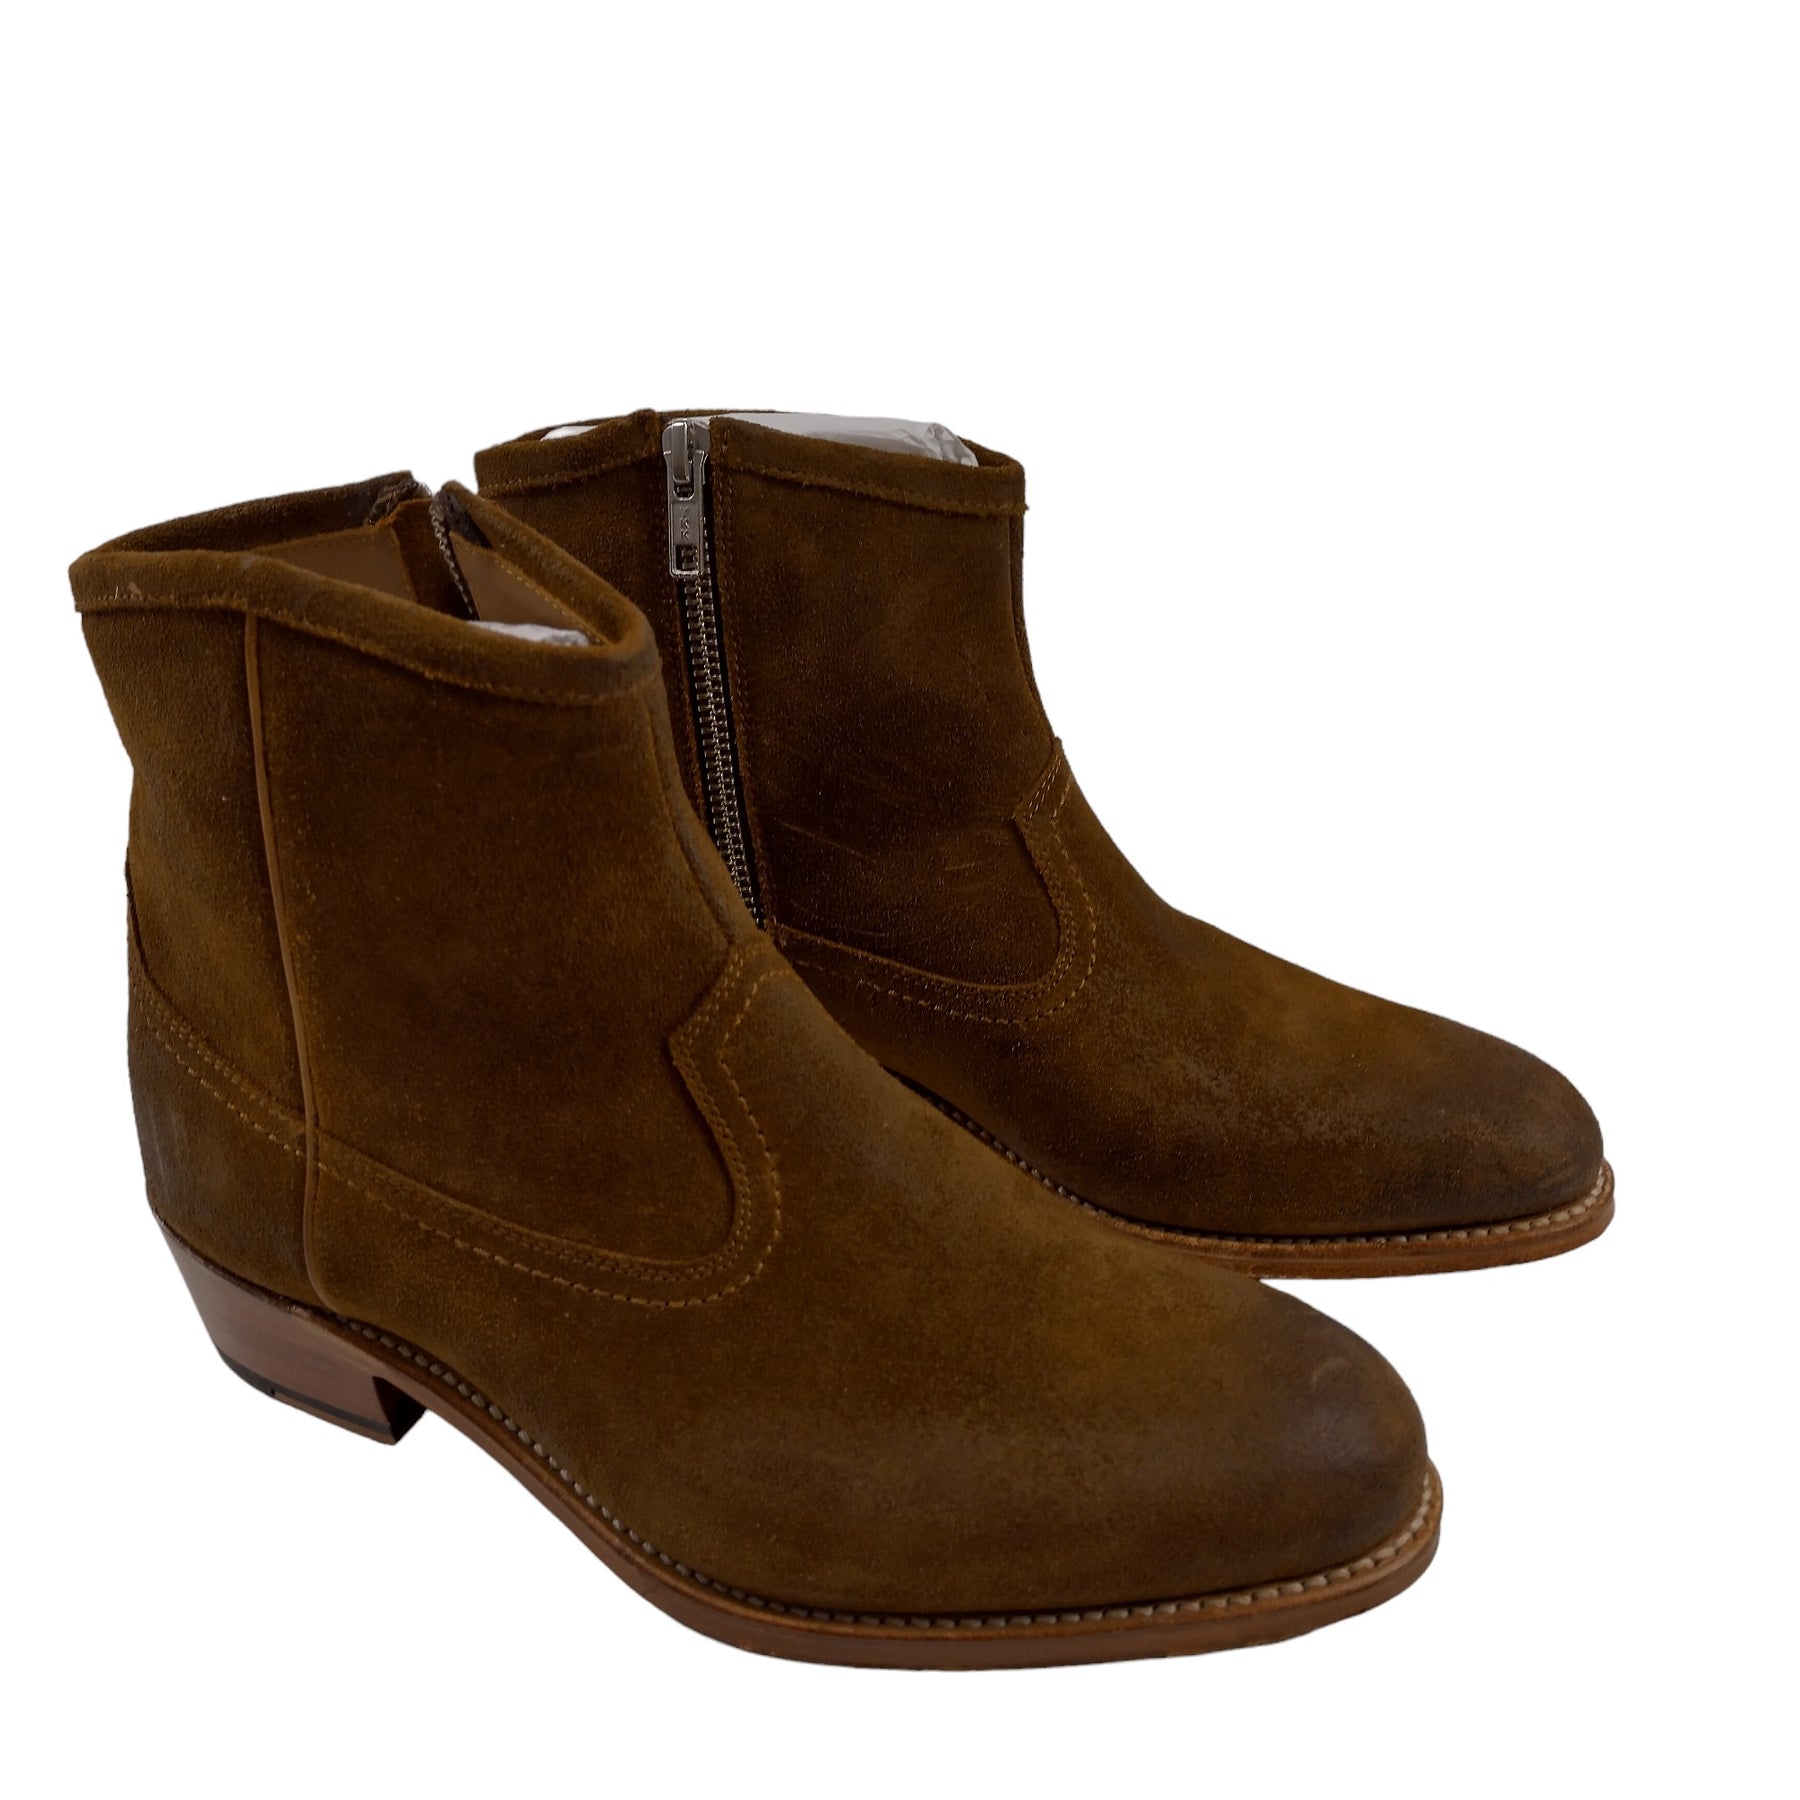 Grenson Brown Suede Kelly Boots